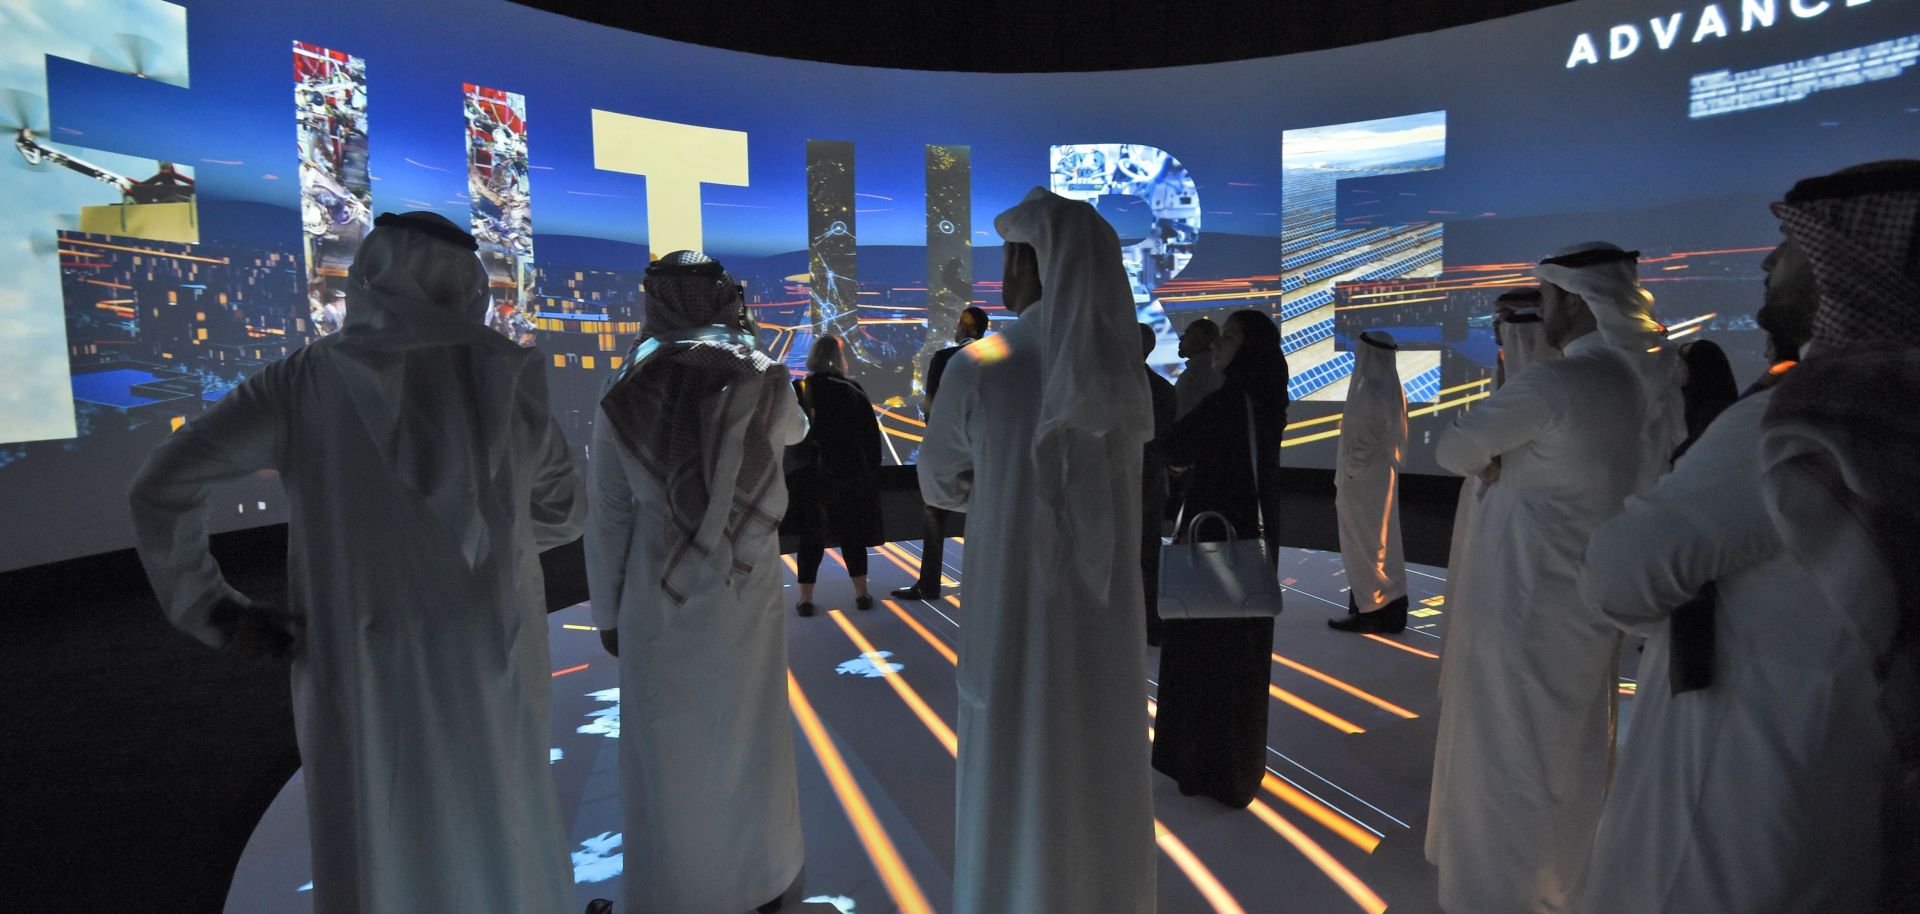 Viewers watch a promotional video touting Saudi Arabia's proposed new megacity, Neom, during an investment conference in Riyadh on Oct. 25, 2017.